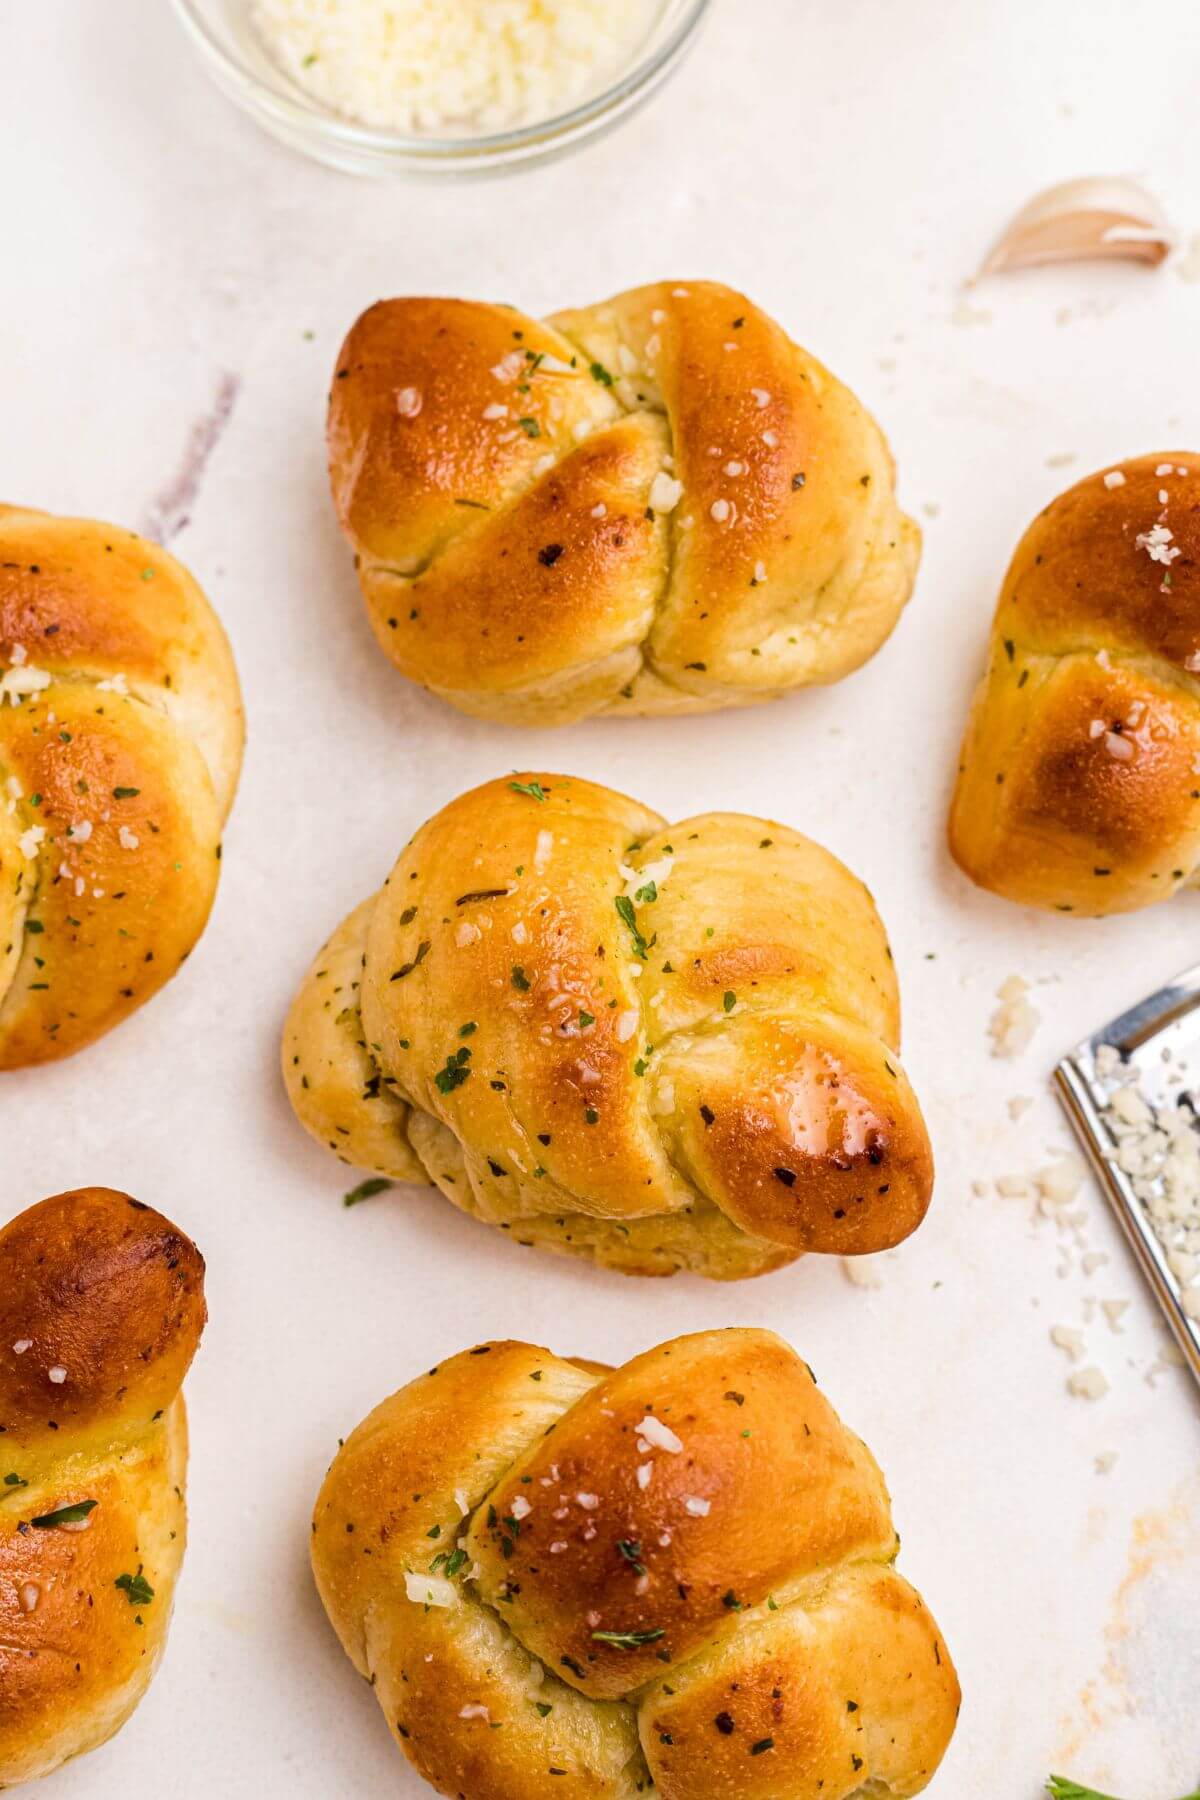 Golden garlic knots brushed with olive oil and shredded cheese on a marble table.